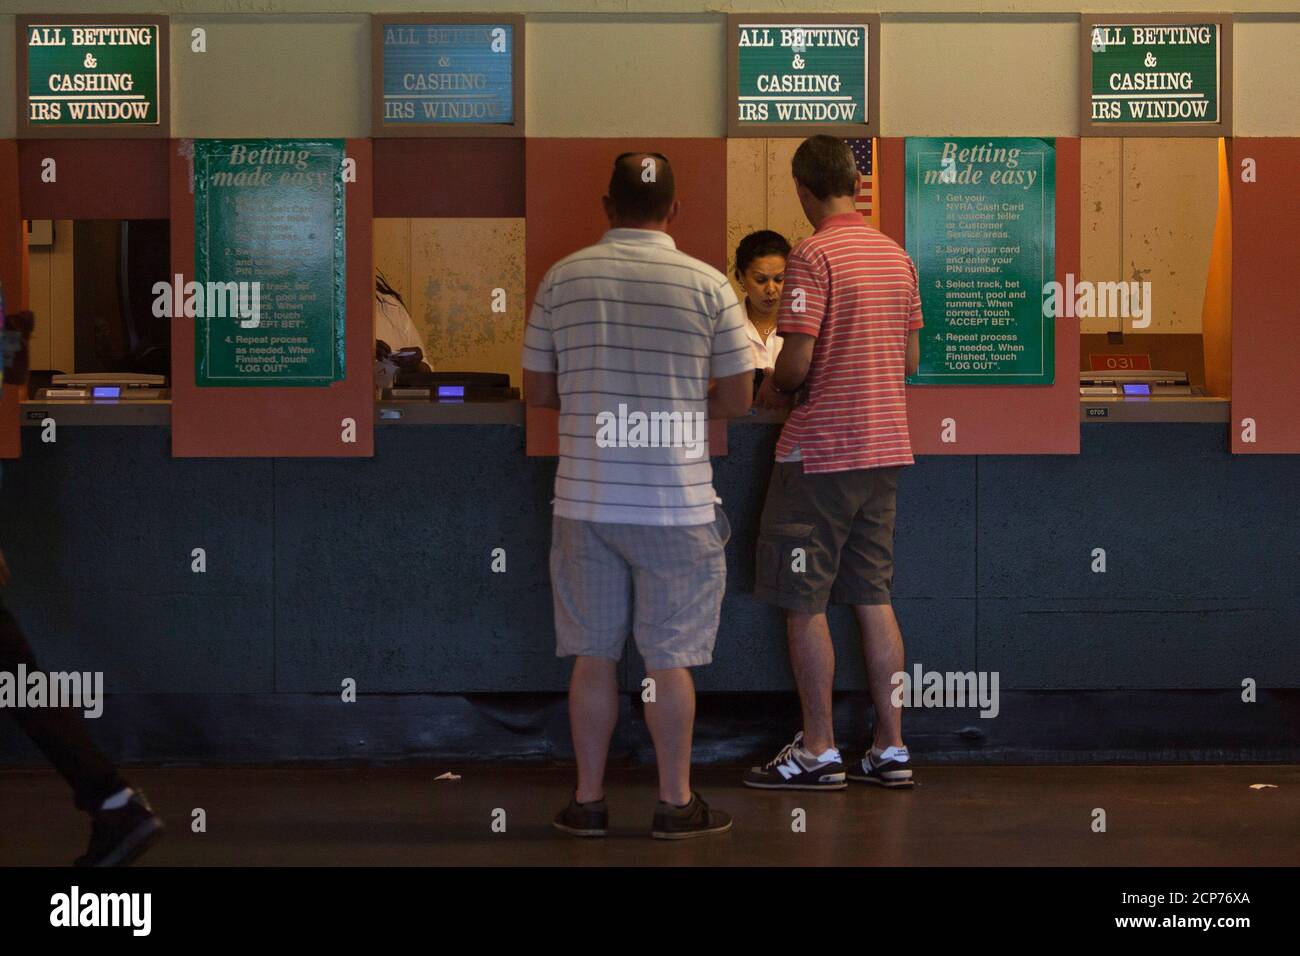 People place bets before the 2014 Belmont Stakes in Elmont, New York June 7, 2014. REUTERS/Carlo Allegri (UNITED STATES - Tags: SPORT HORSE RACING SOCIETY) Stock Photo